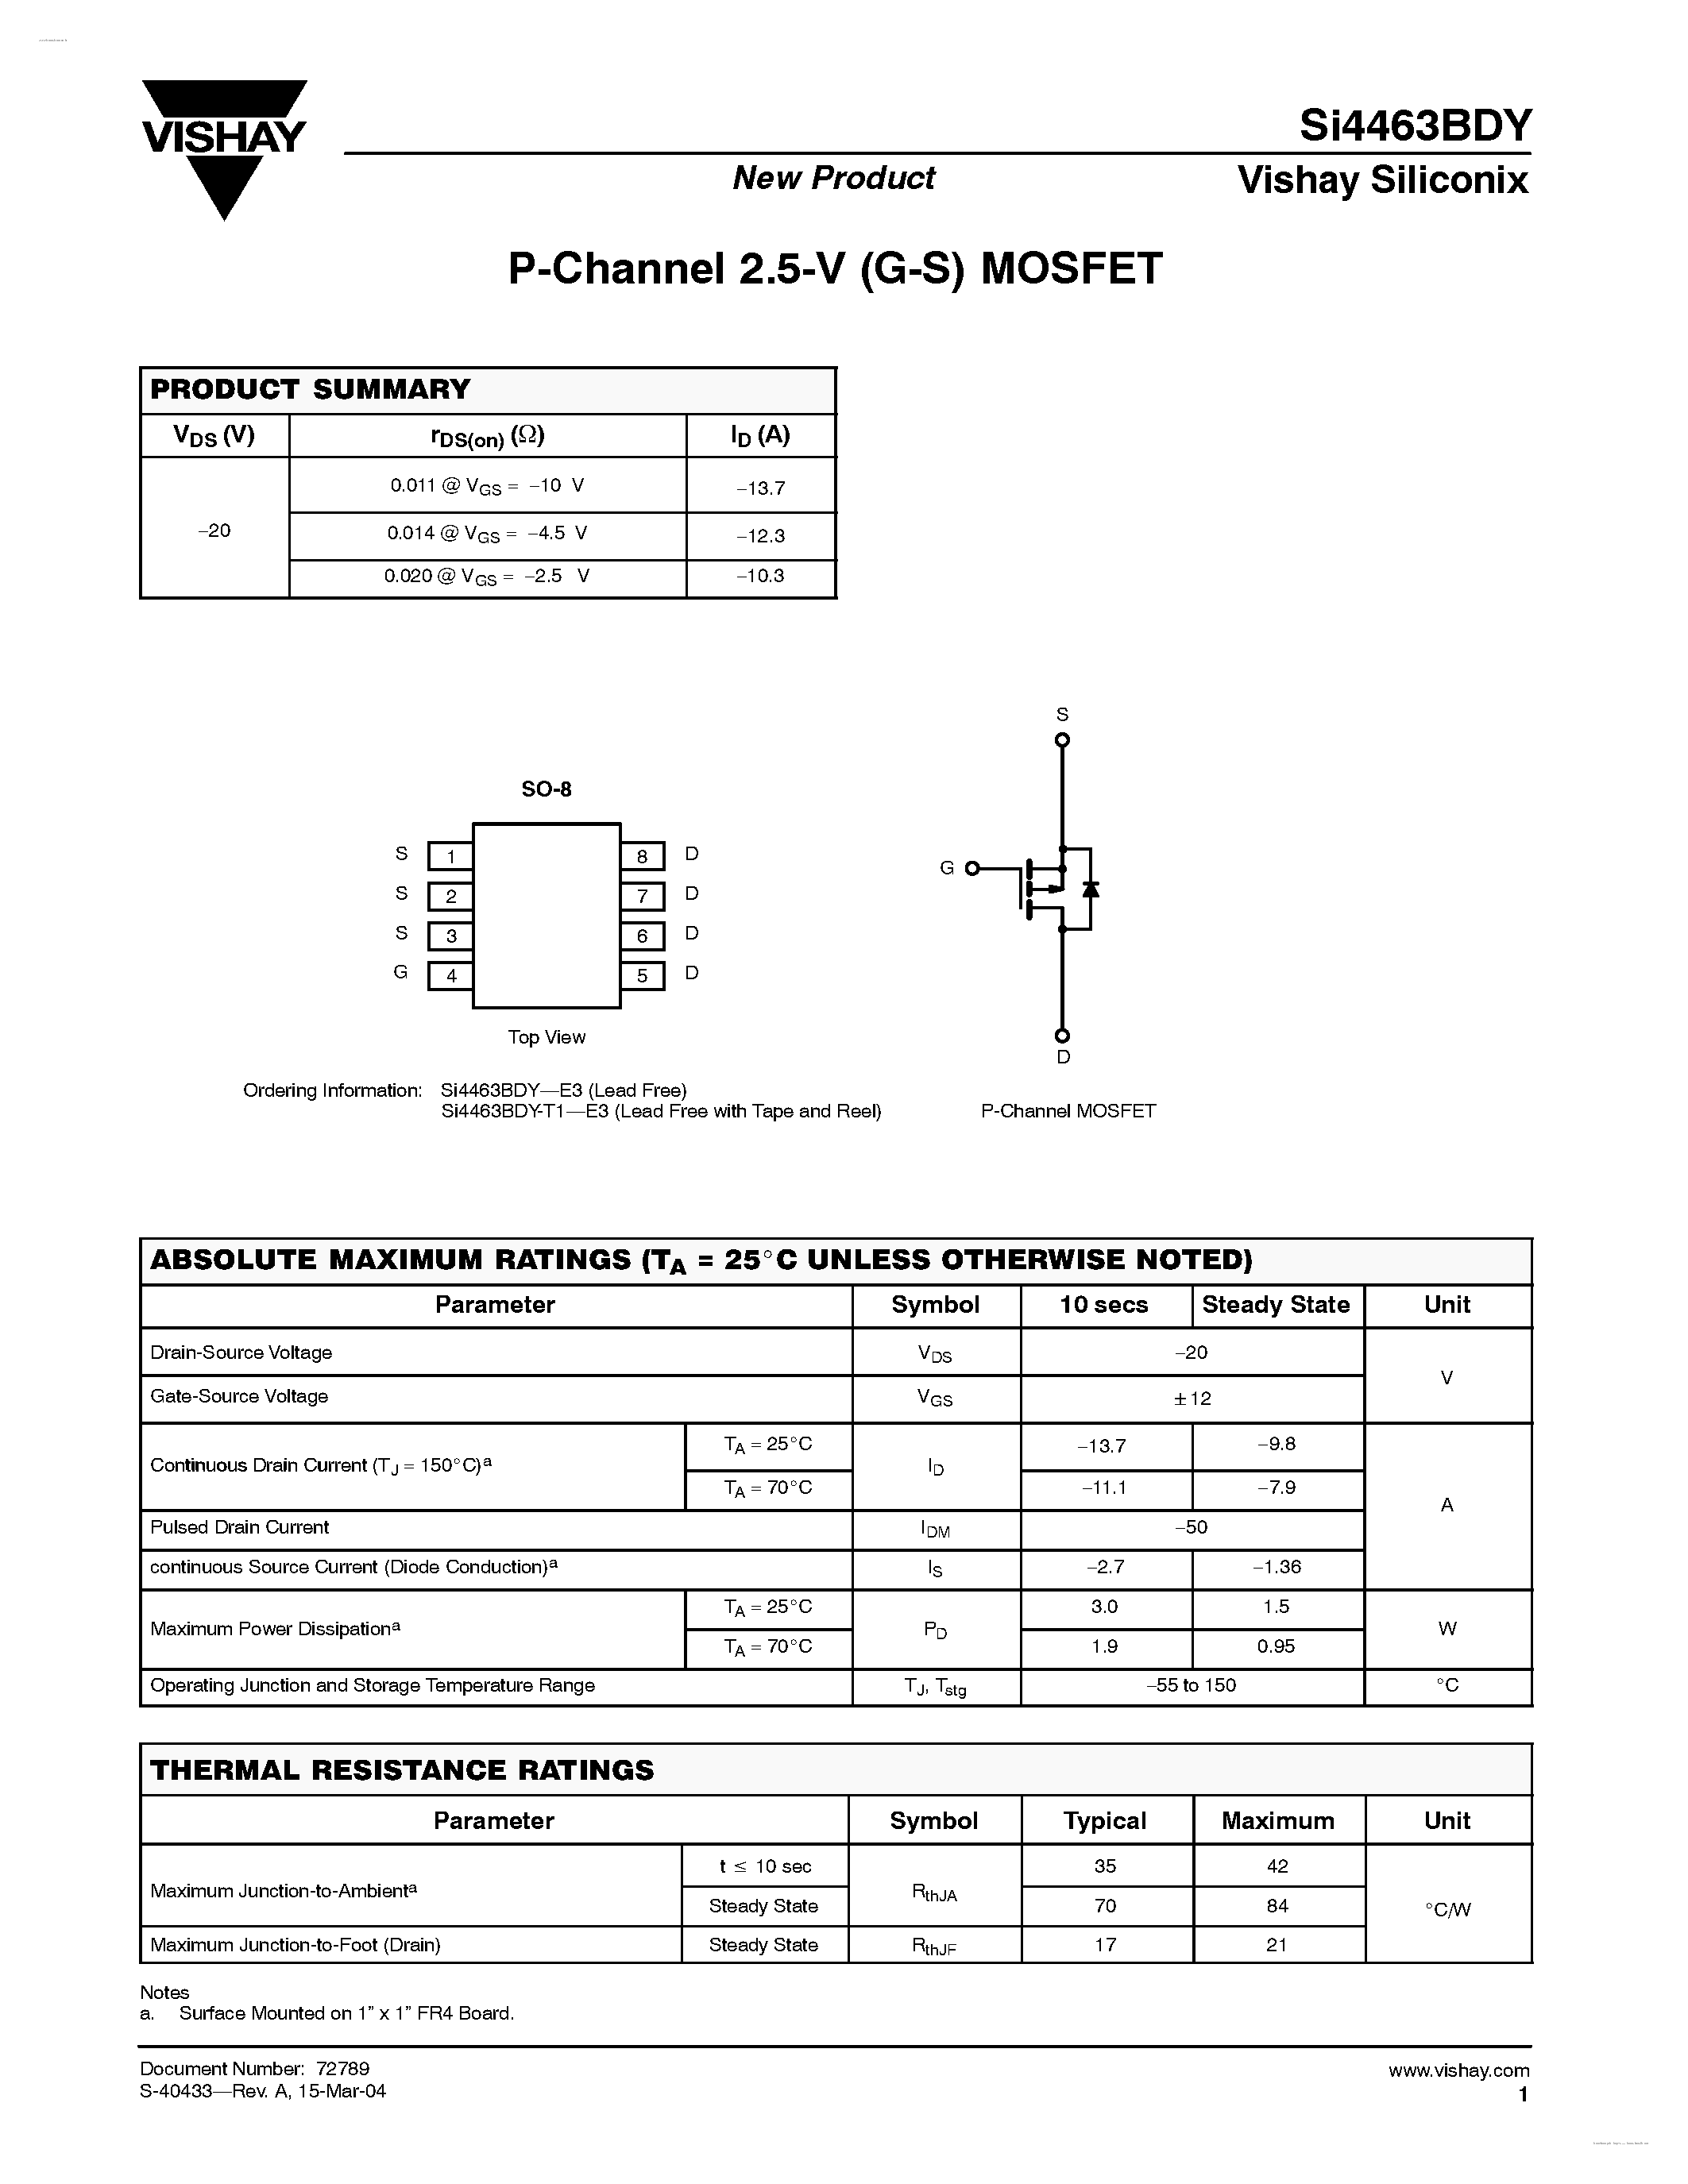 Datasheet SI4463BDY - P-Channel 2.5-V (G-S) MOSFET page 1